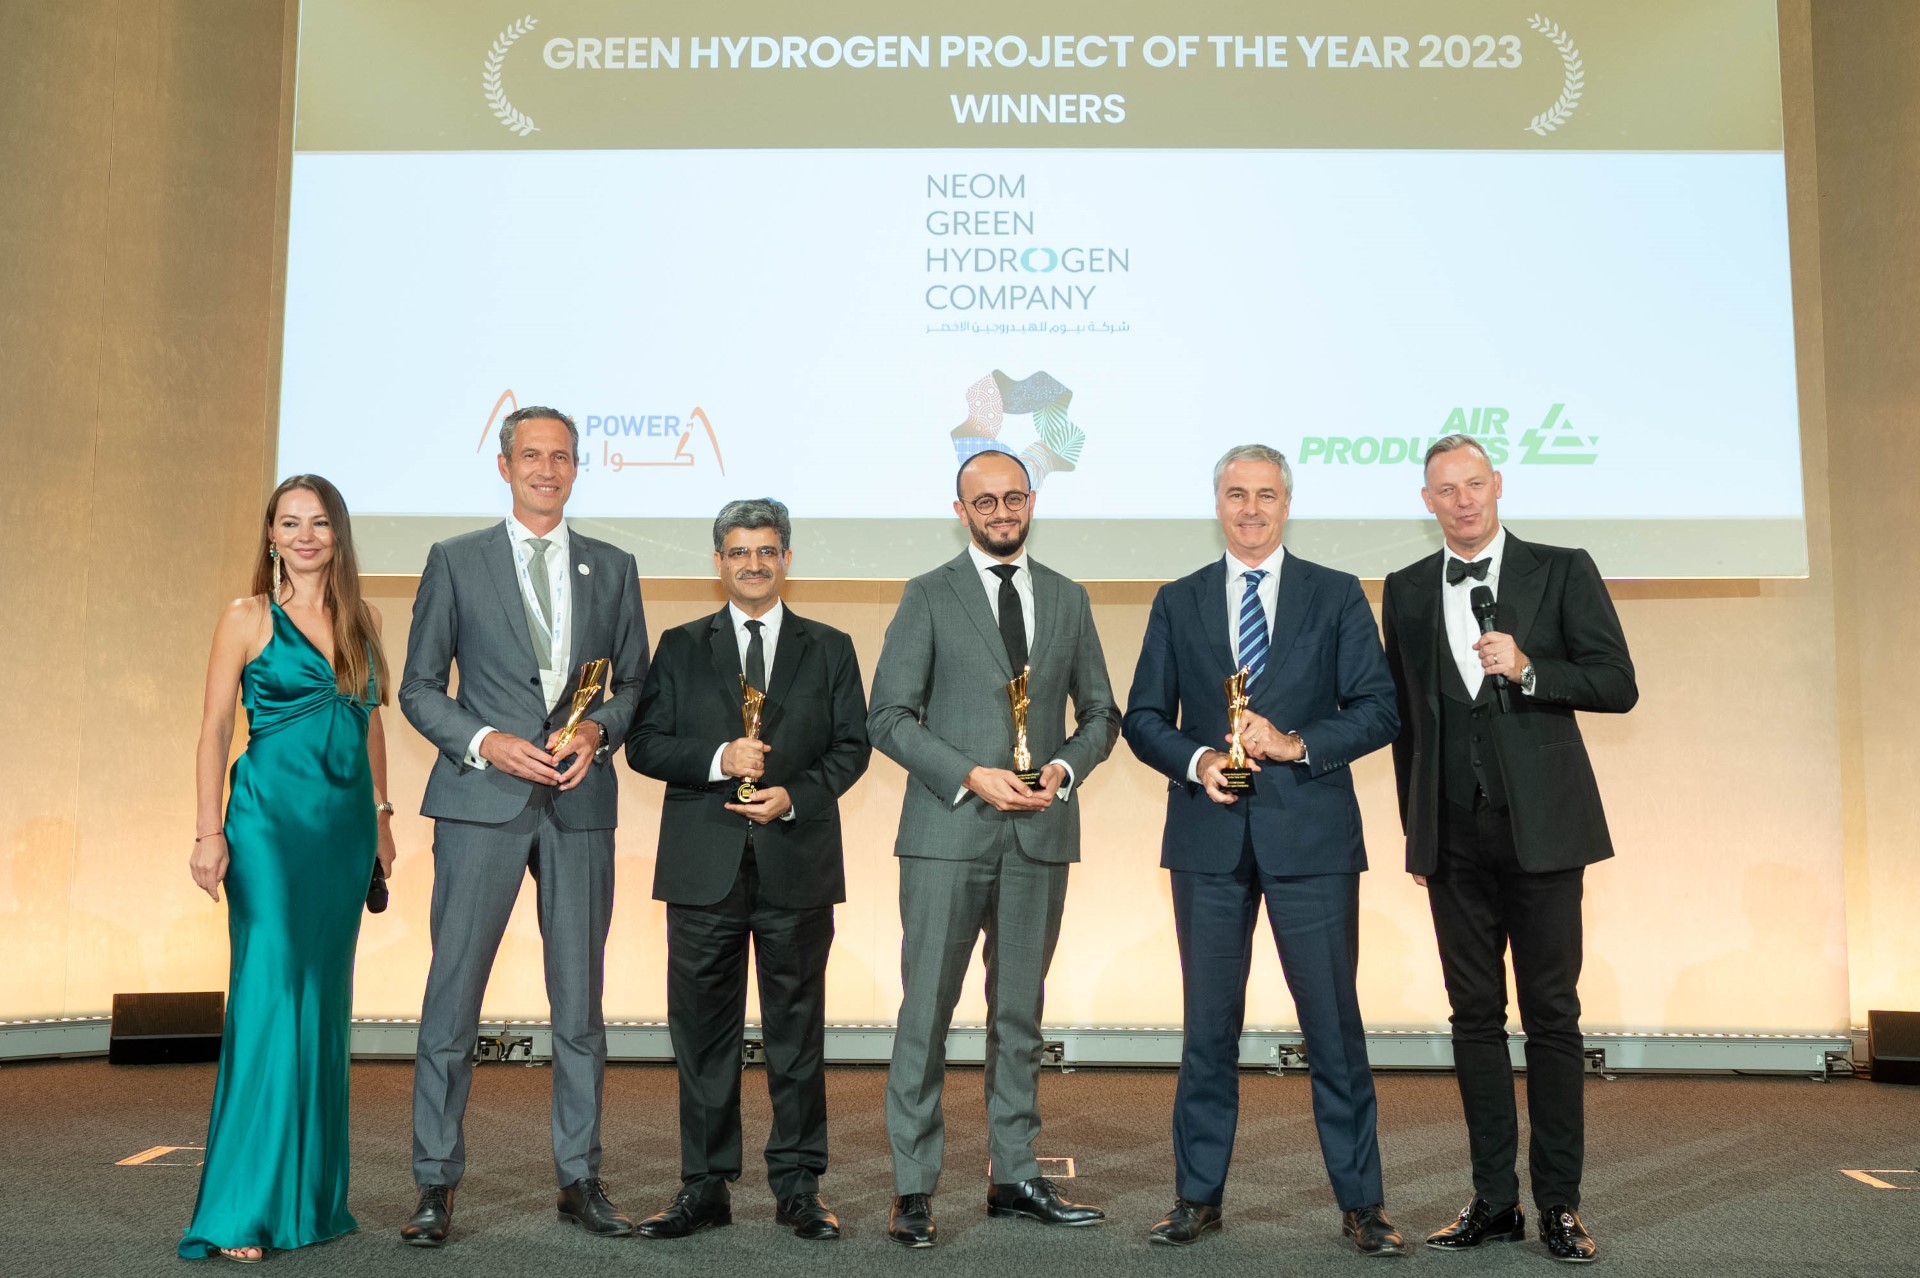 NEOM Green Hydrogen Company won the ‘Green Hydrogen Project of the Year’ at the Hydrogen Impact Investment Awards | September 2023.